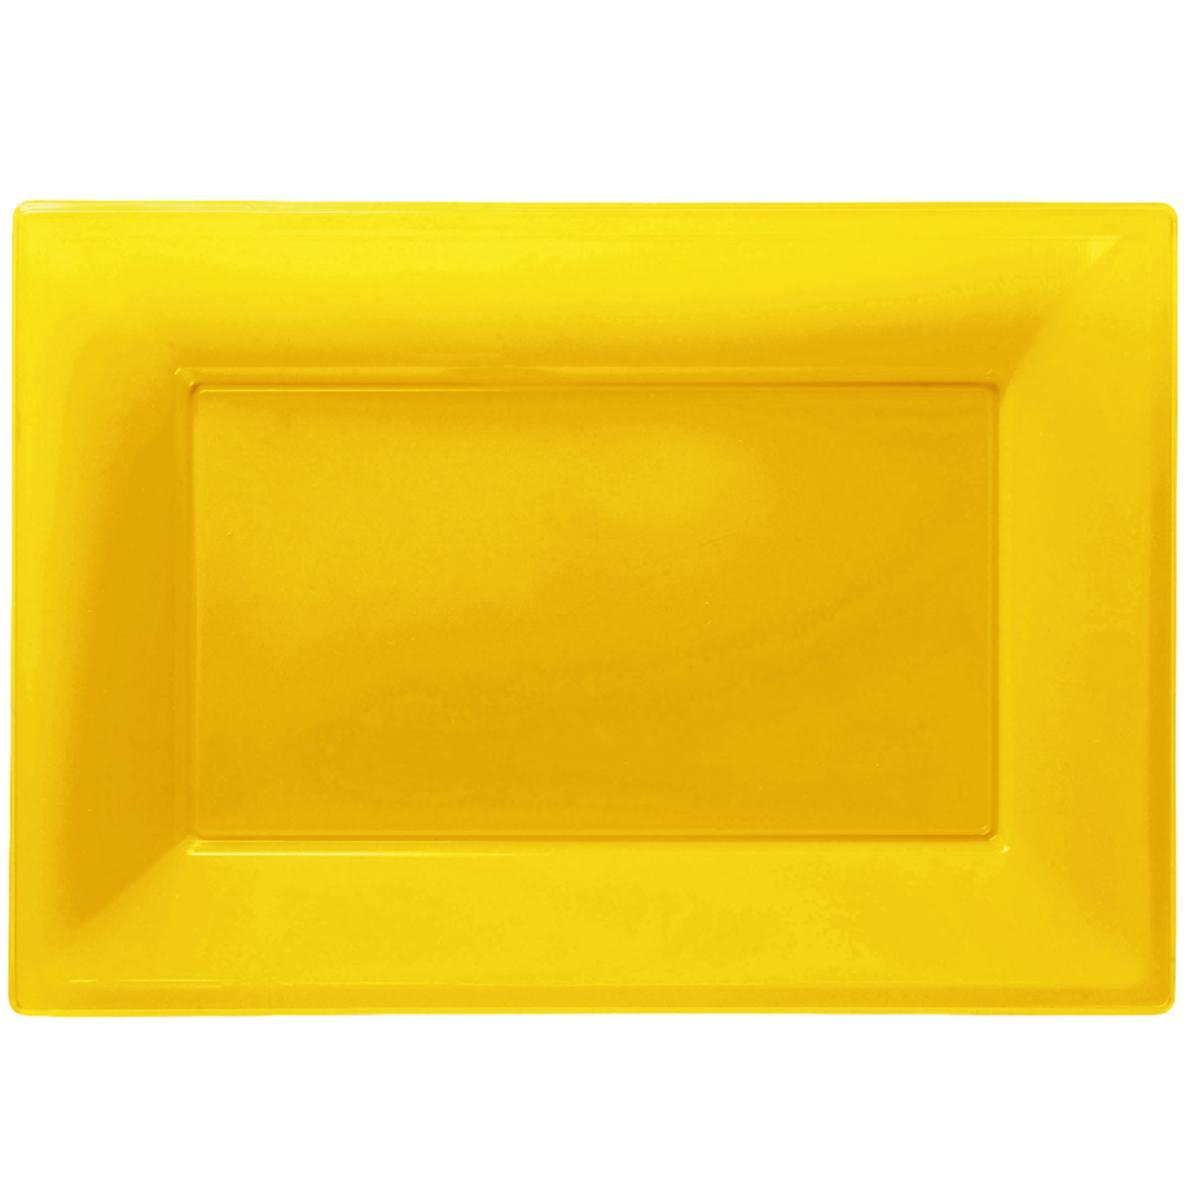 Sunshine Yellow 32cm x 23cm Plastic Serving Platters pk3 by Amscan 997429 available from Karnival Costumes